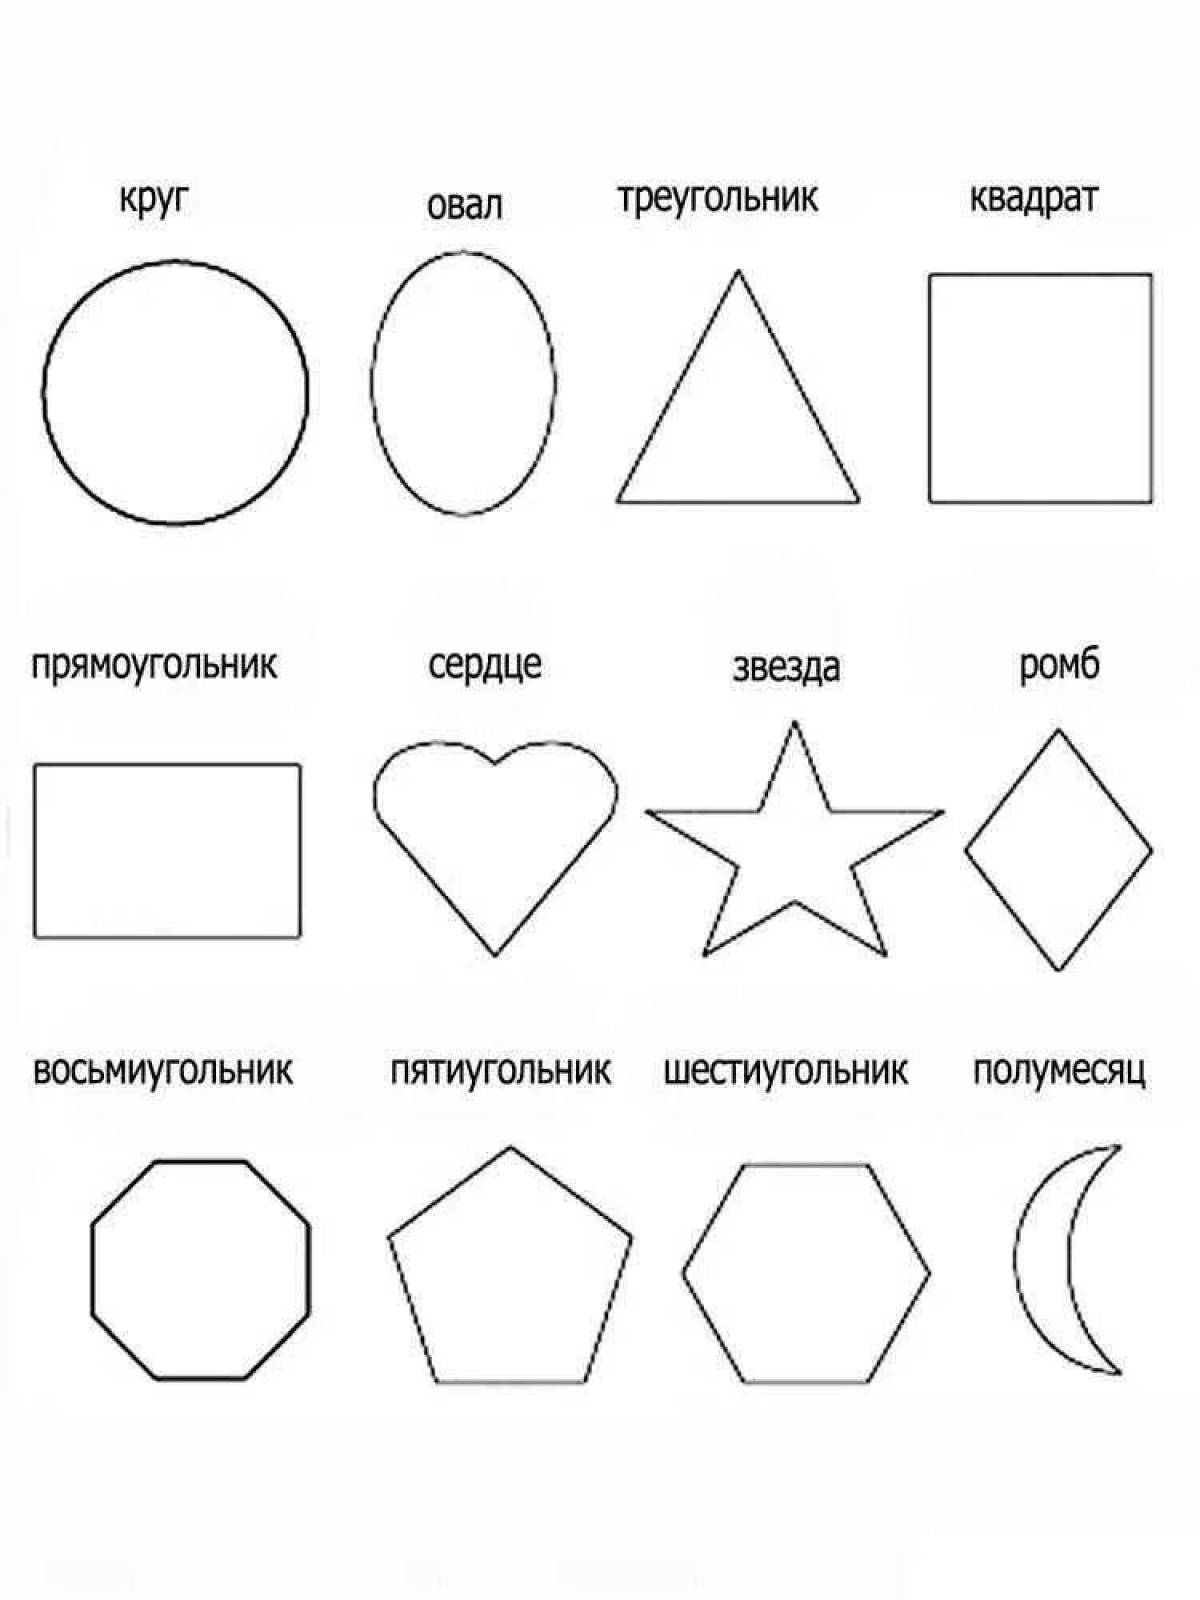 Coloring page with geometric shapes